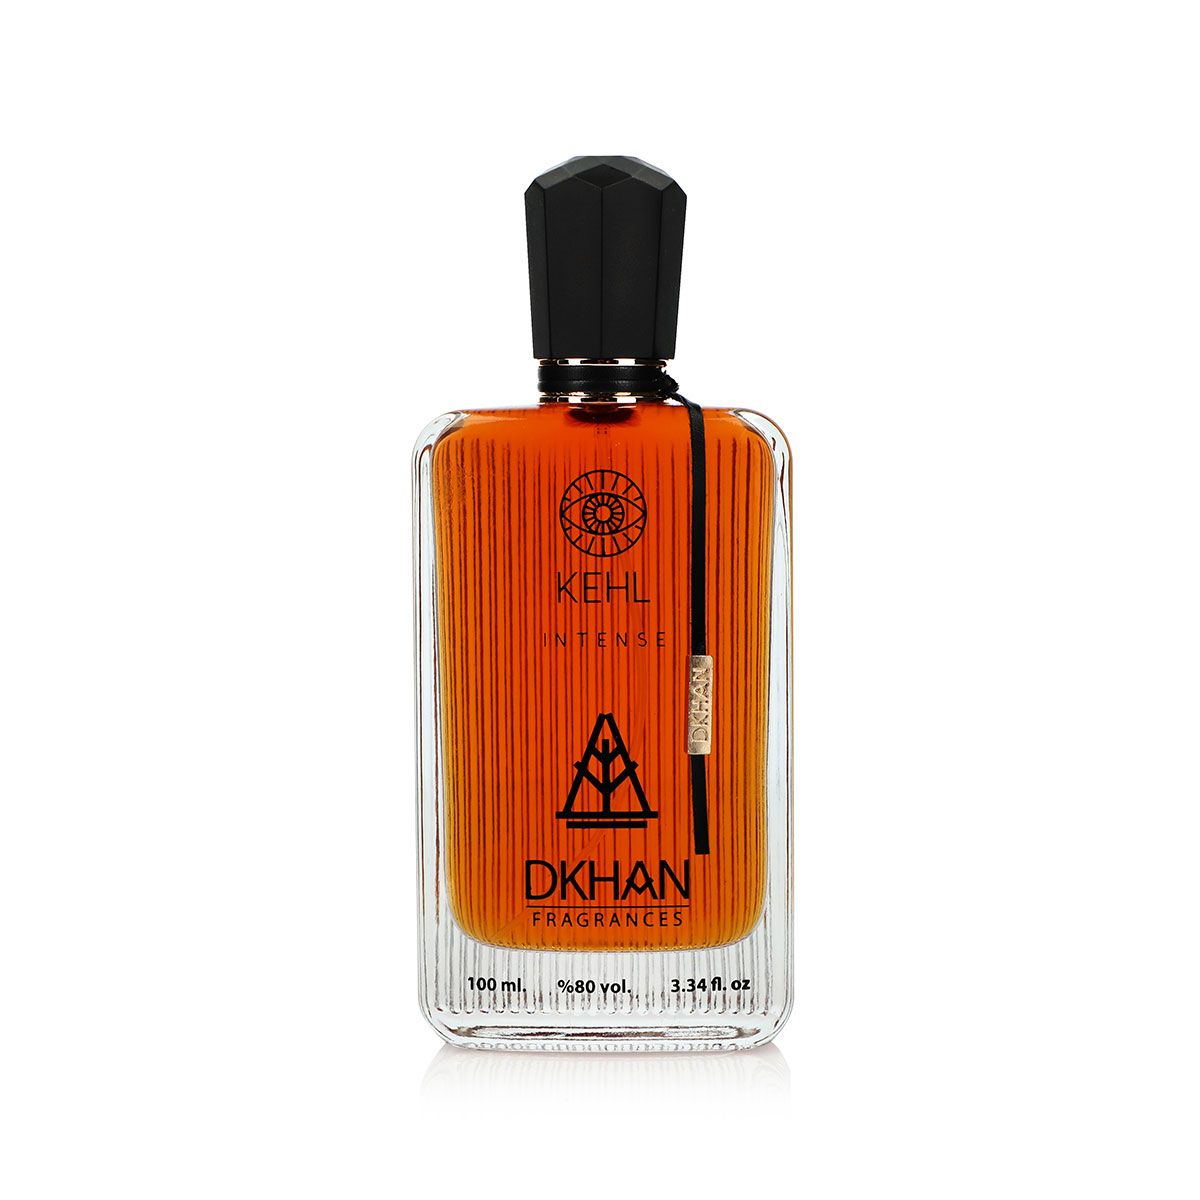 The image shows a rectangular glass perfume bottle with a black cap, filled with an orange-colored liquid. The bottle has several labels: the top one includes a circular logo with the text "KEHL" and a smaller text below it reads "INTENSE". In the center, there's a large stylized emblem with the text "DKHAN FRAGRANCES" beneath it.